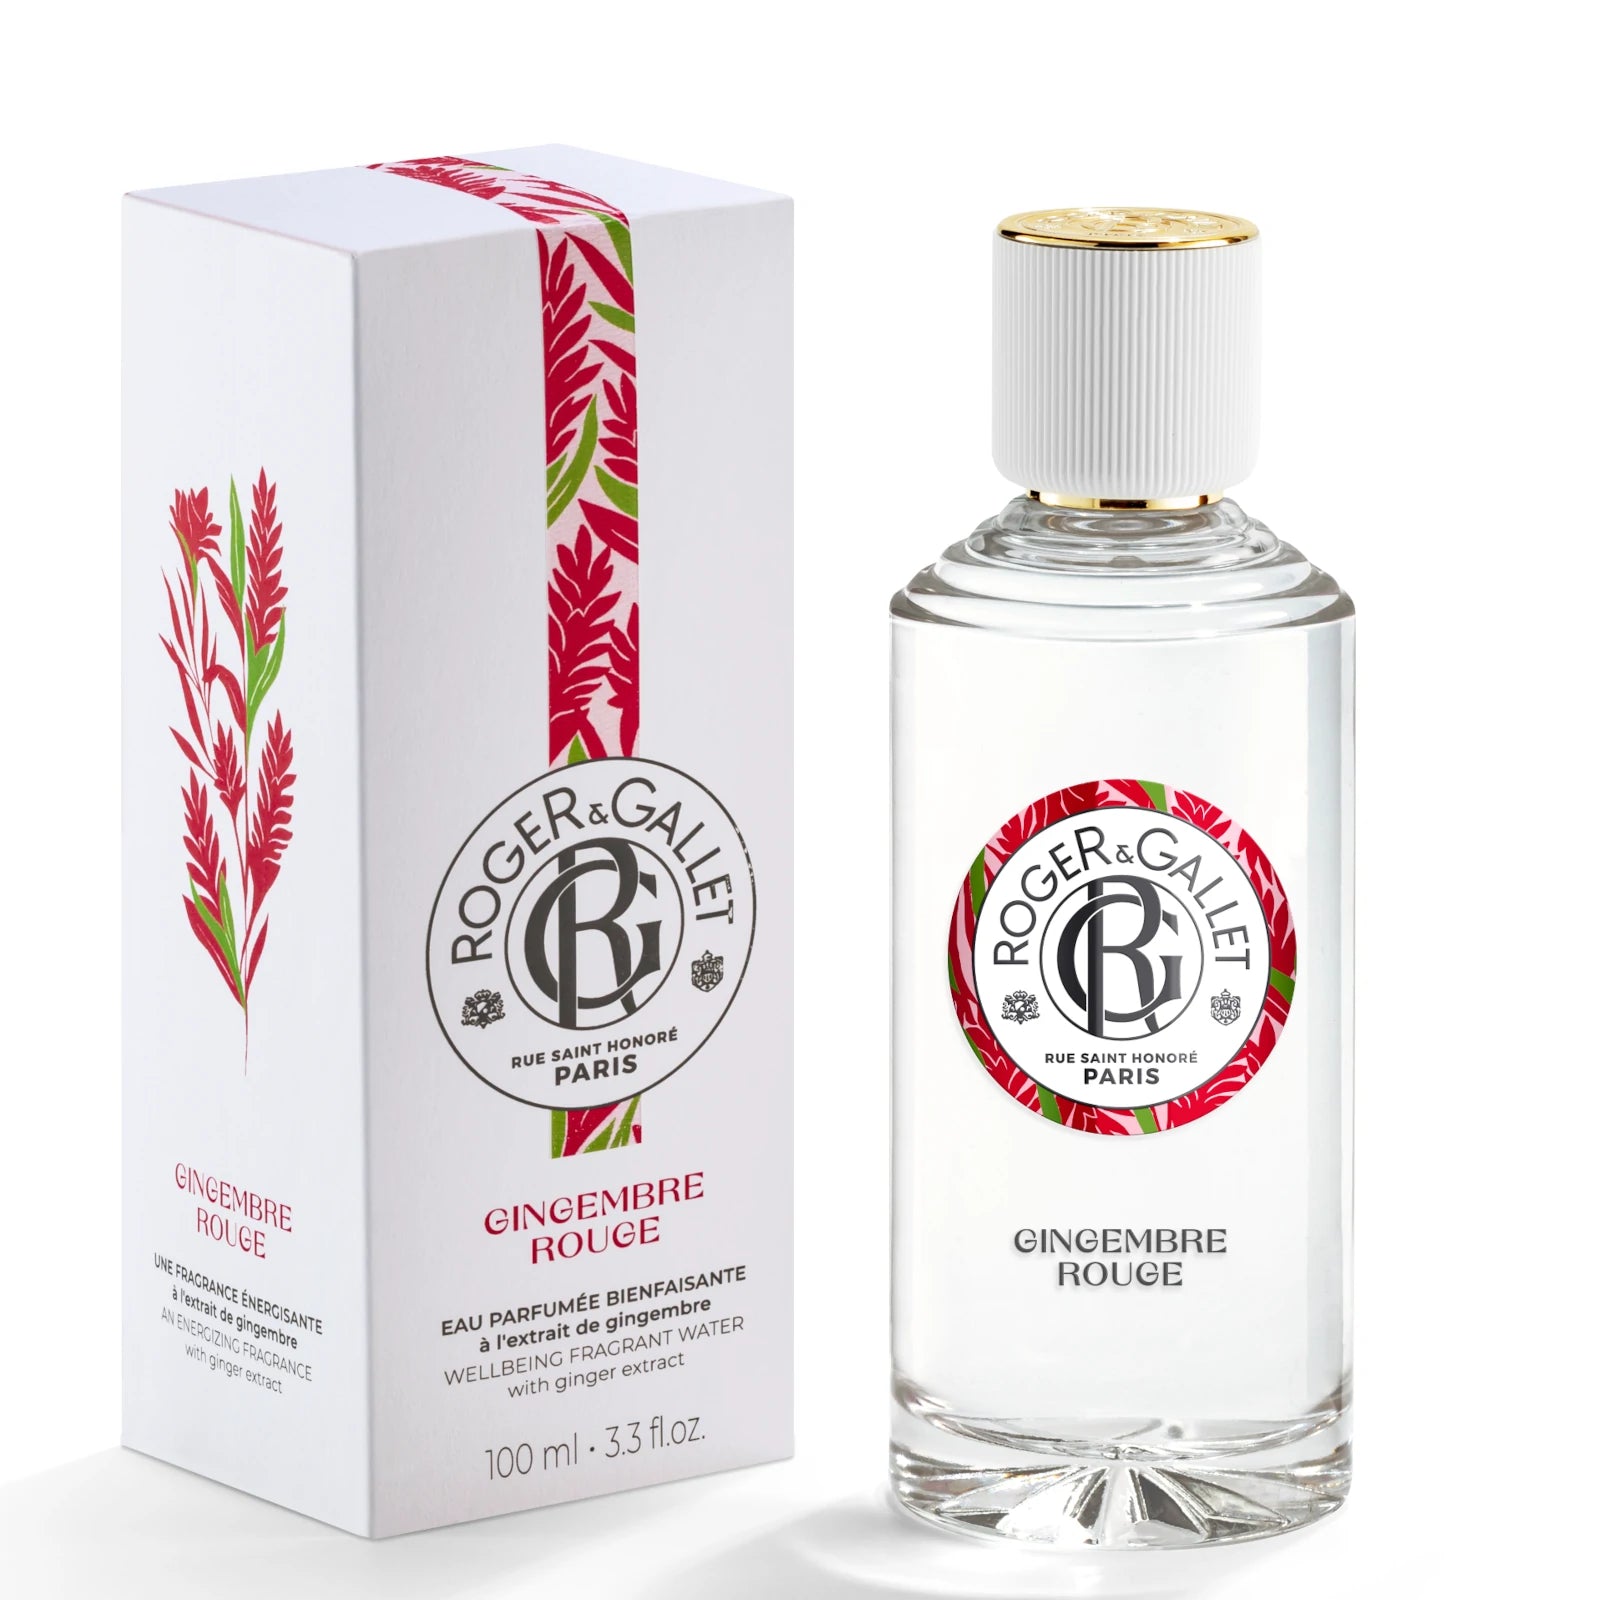 Rodger & Gallet - Gingembre Rouge